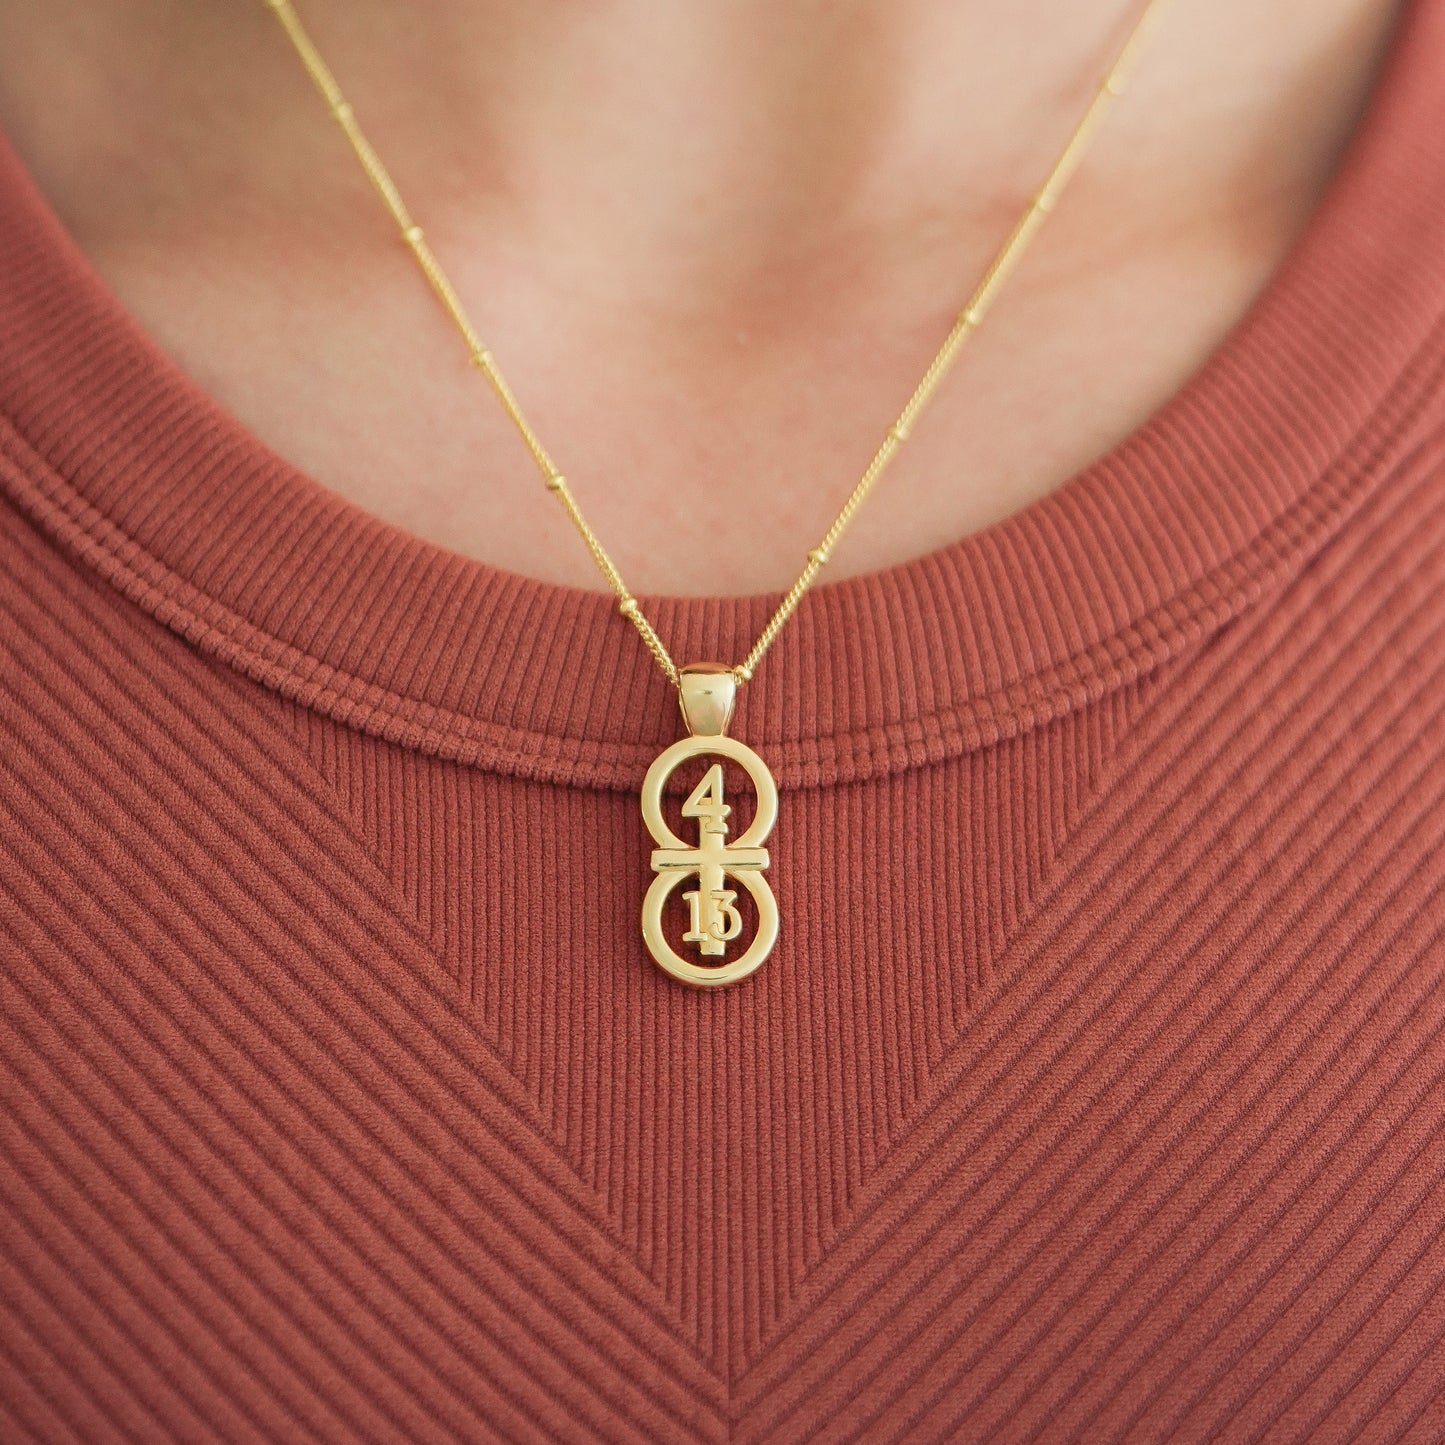 Gold large pendants displayed on the neck against a burnt orange shirt with our 14k gold filled satellite chain.  Our 29 and 11® pendant has the numbers 4 and 13 intertwined with the cross to represent Philippians 4:13 with the chapter word "Philippians" inscribed on the back.